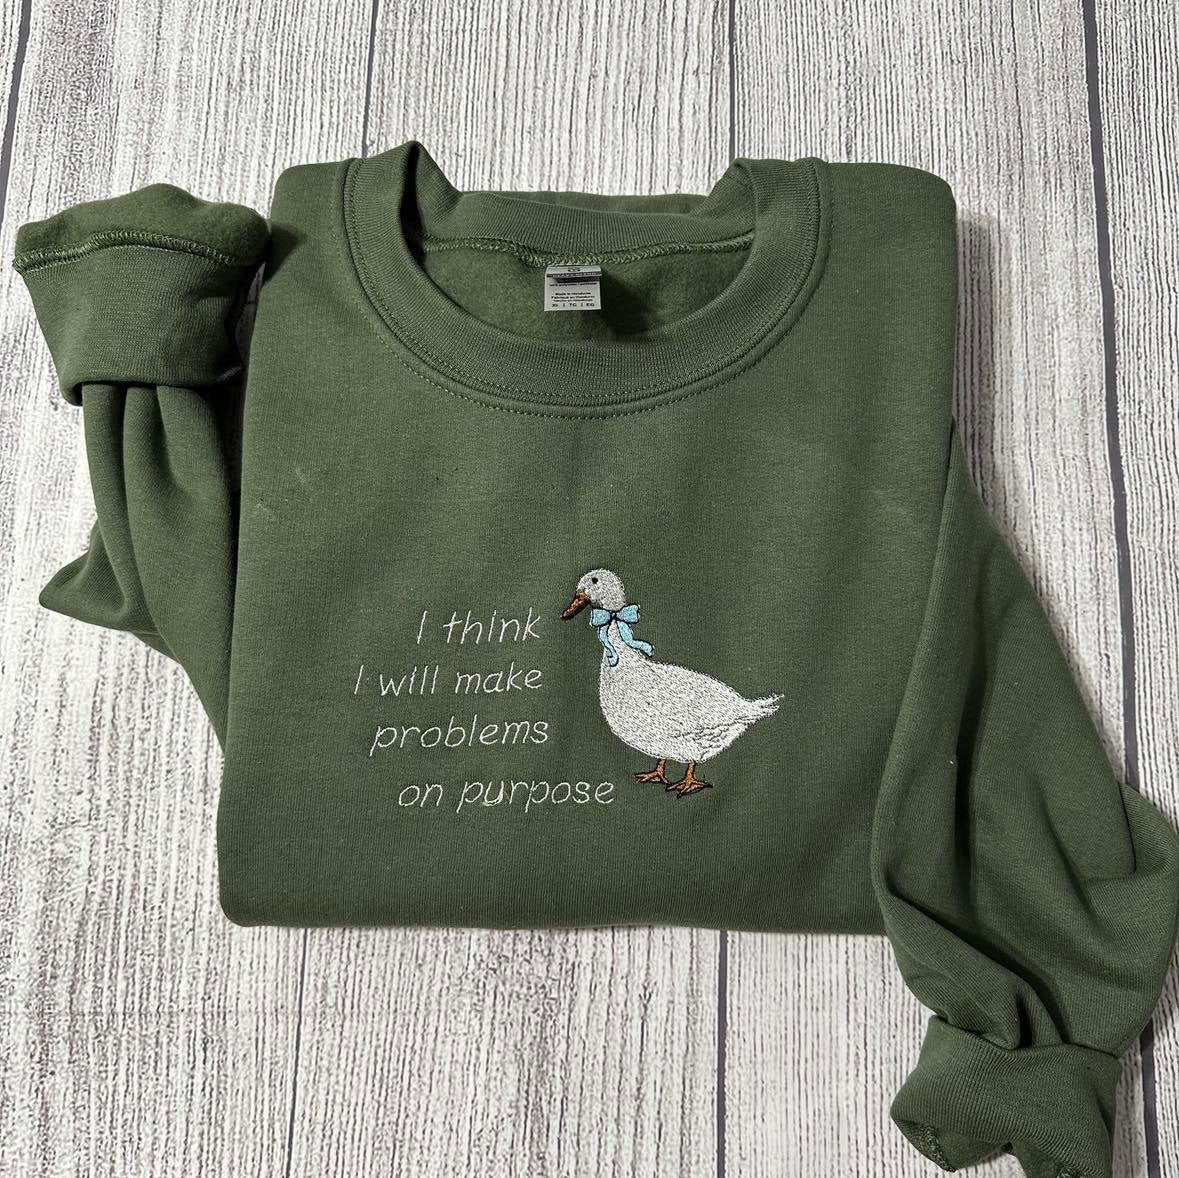 Embroidered Silly Goose  Sweatshirts; I think I will make problems on purpose  Embroidered crewneck;  gift for her goose sweatshirt